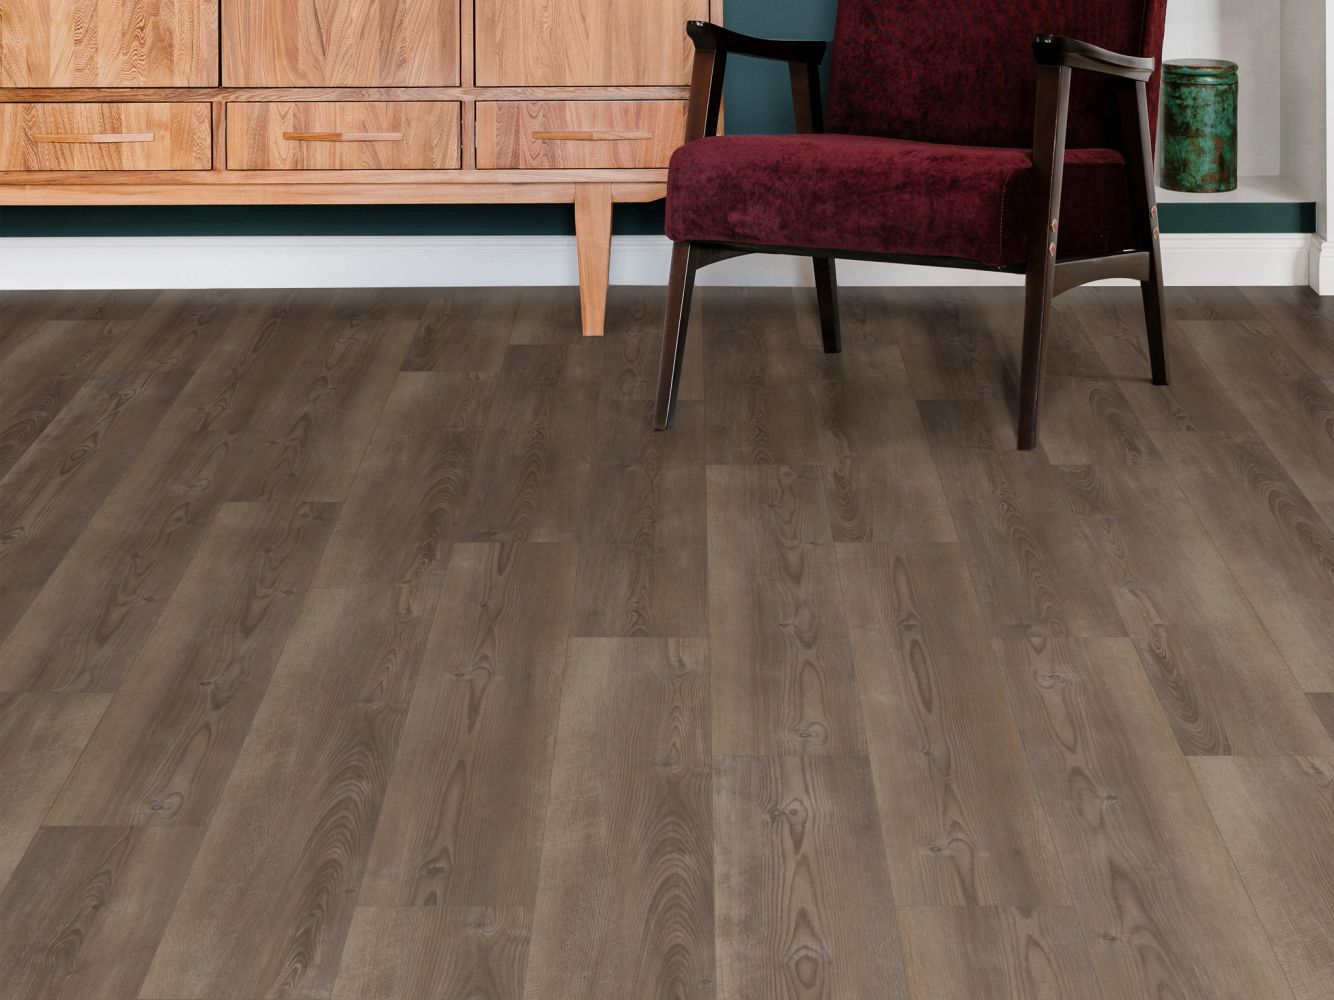 Shaw Floors Resilient Residential Paladin Plus Ripped Pine 07047_0278V